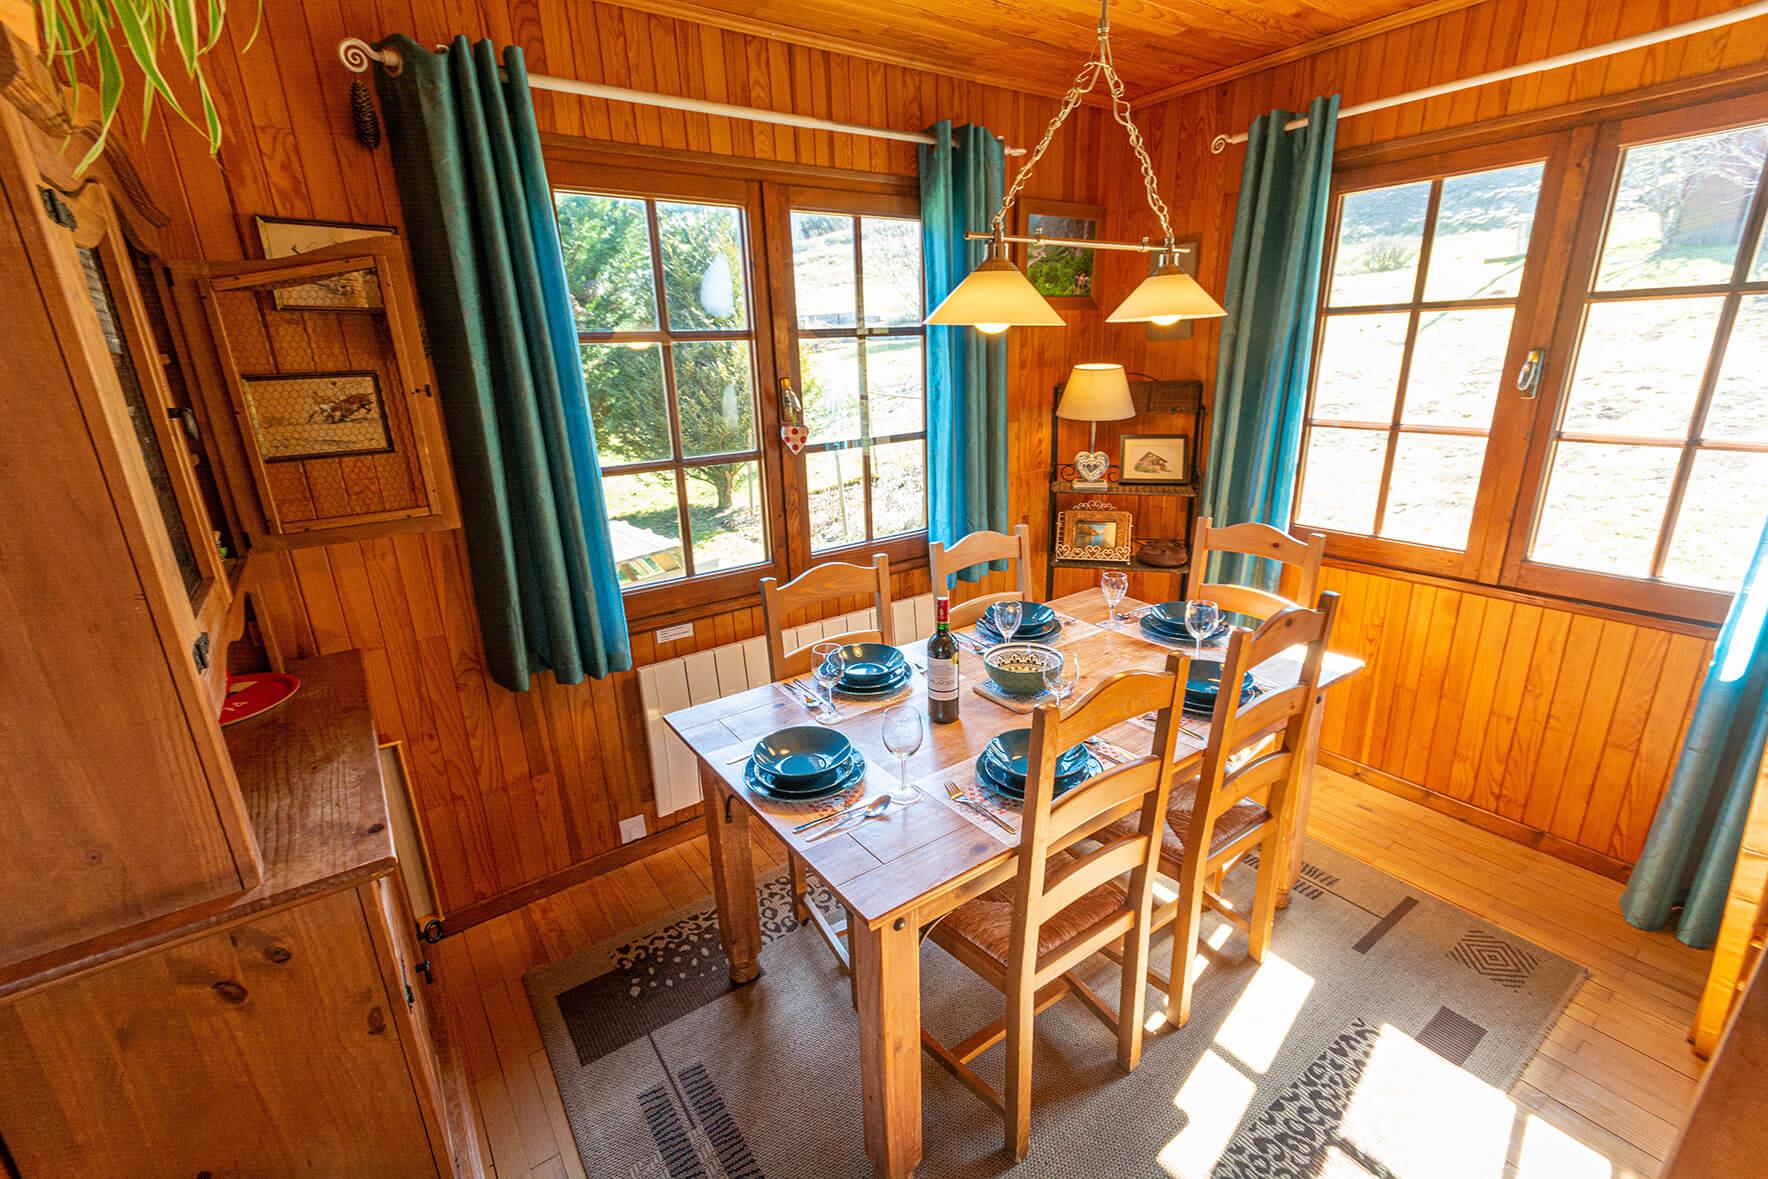 Chalet Le Gerbera La Rivière Enverse - The comfortable dining area comes equipped with a raclette machine